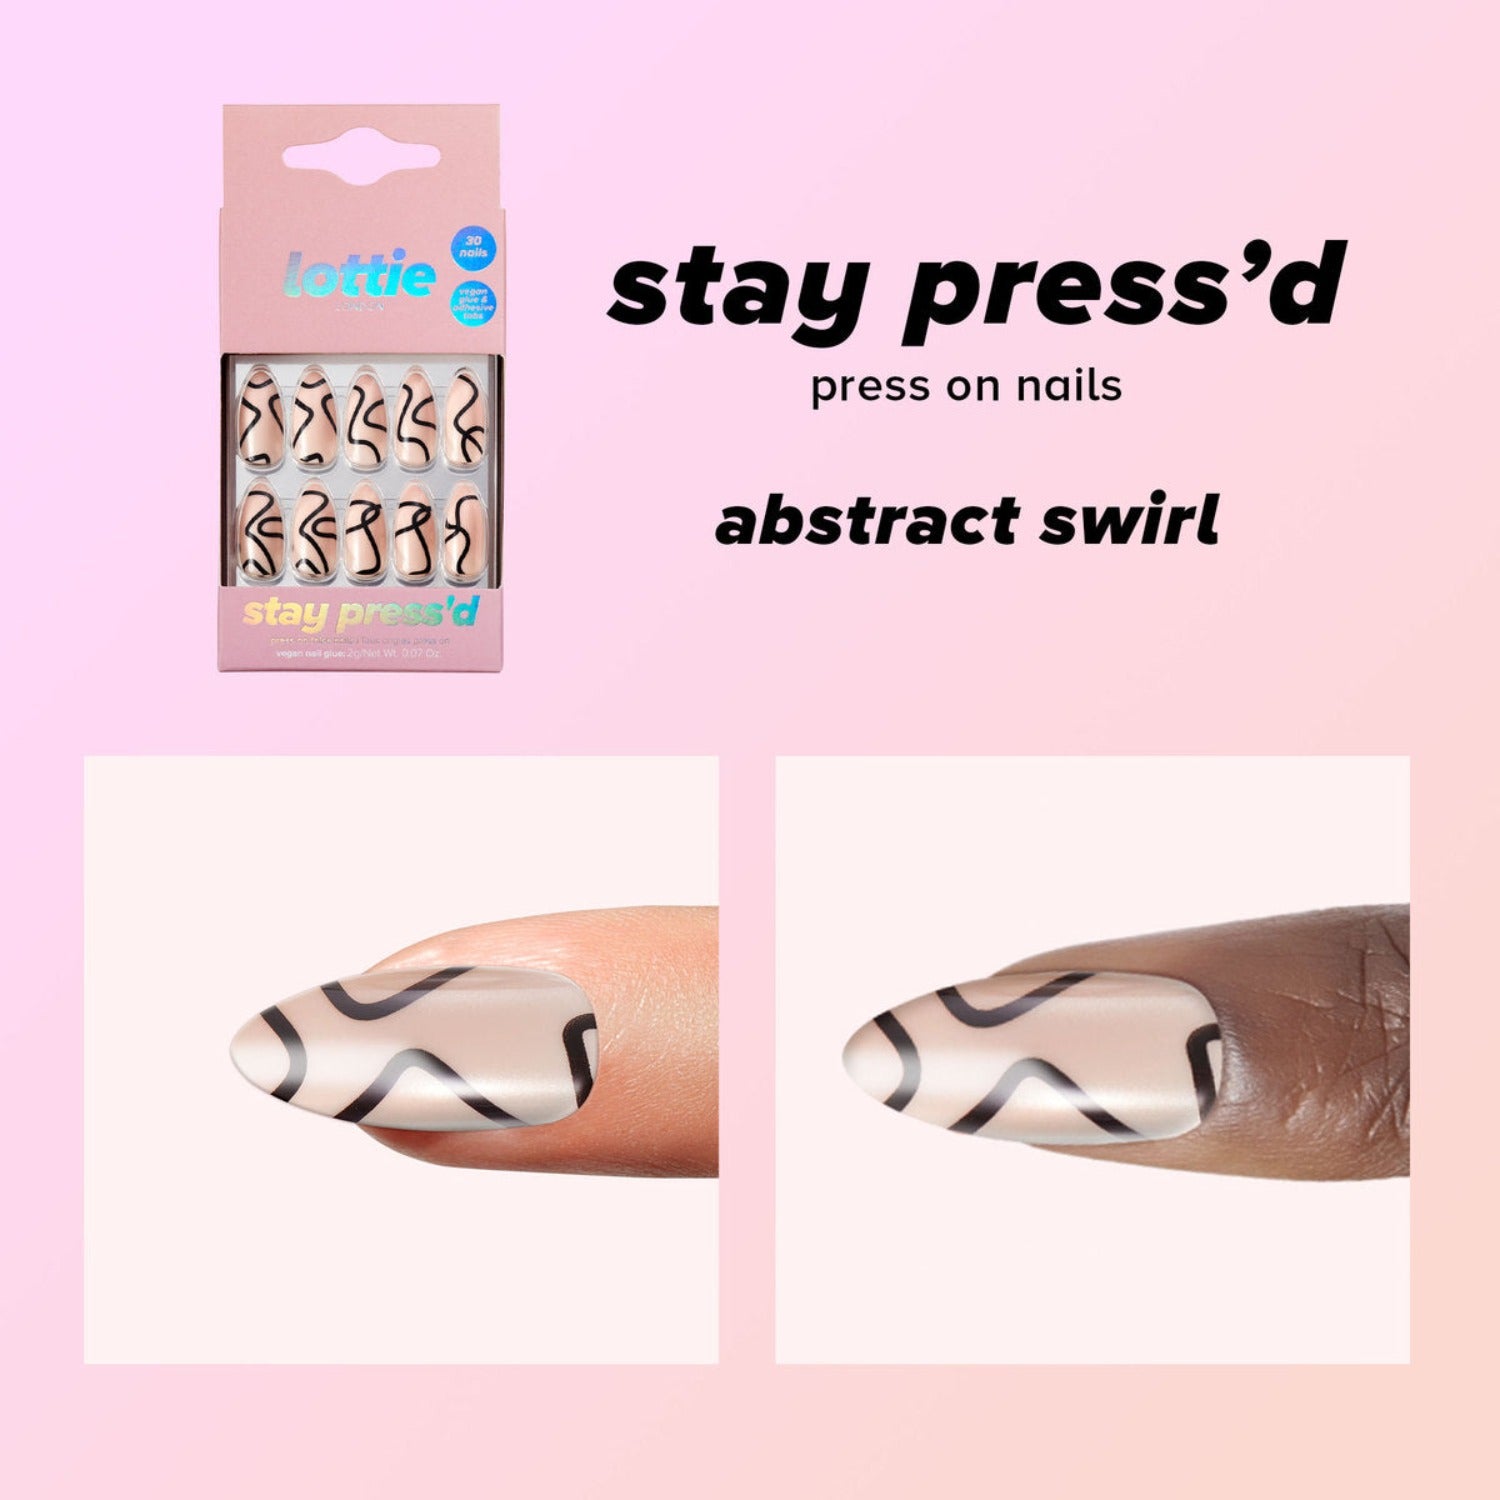 stay press'd - abstract swirl